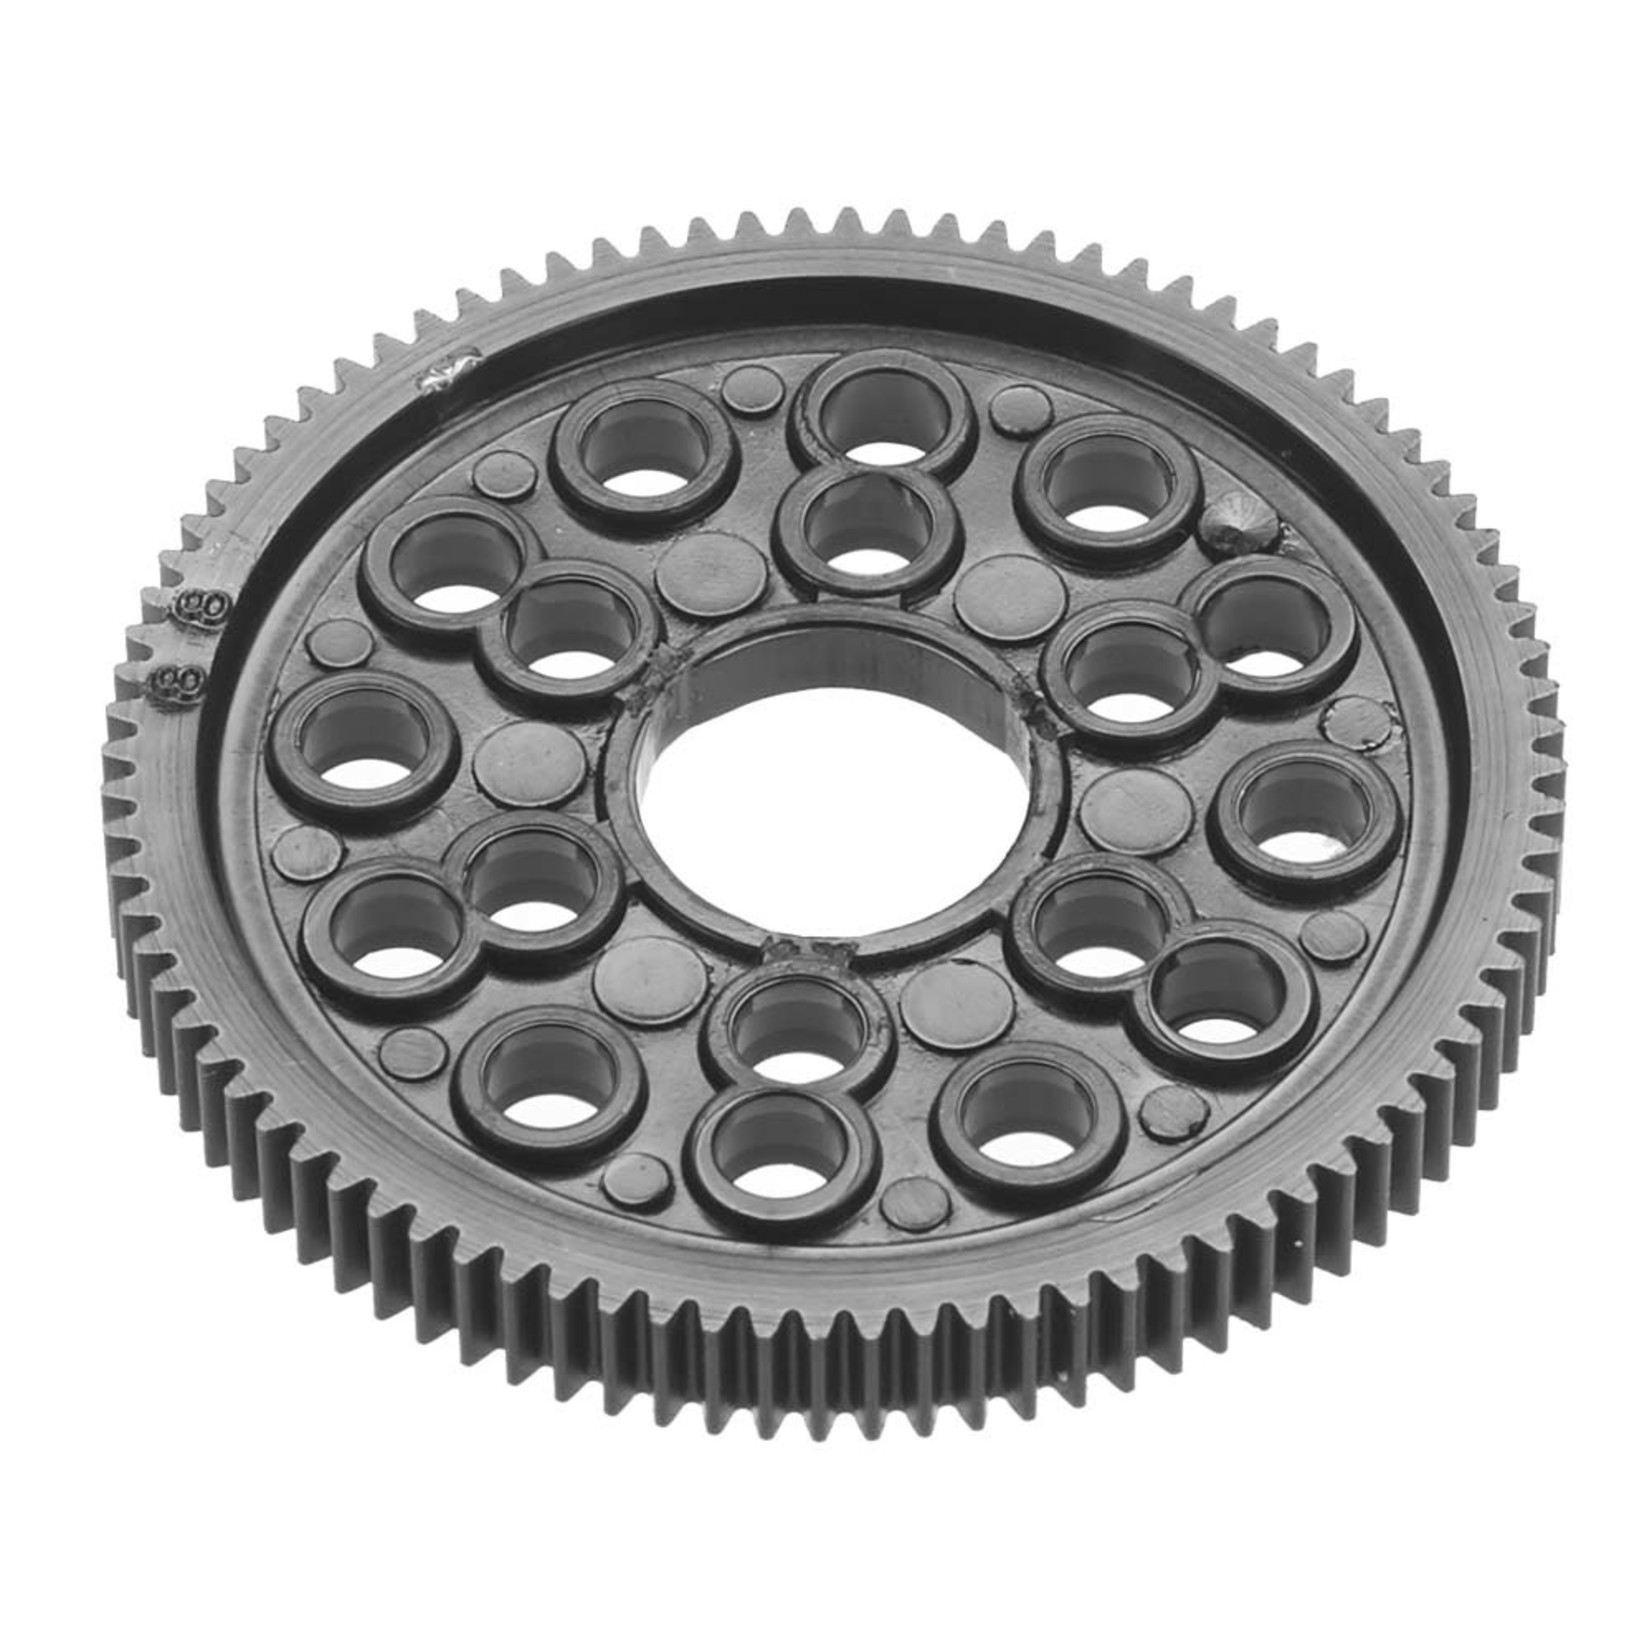 Kimbrough KIM709 - 88 Tooth 64 Pitch Pro Thin Spur Gear